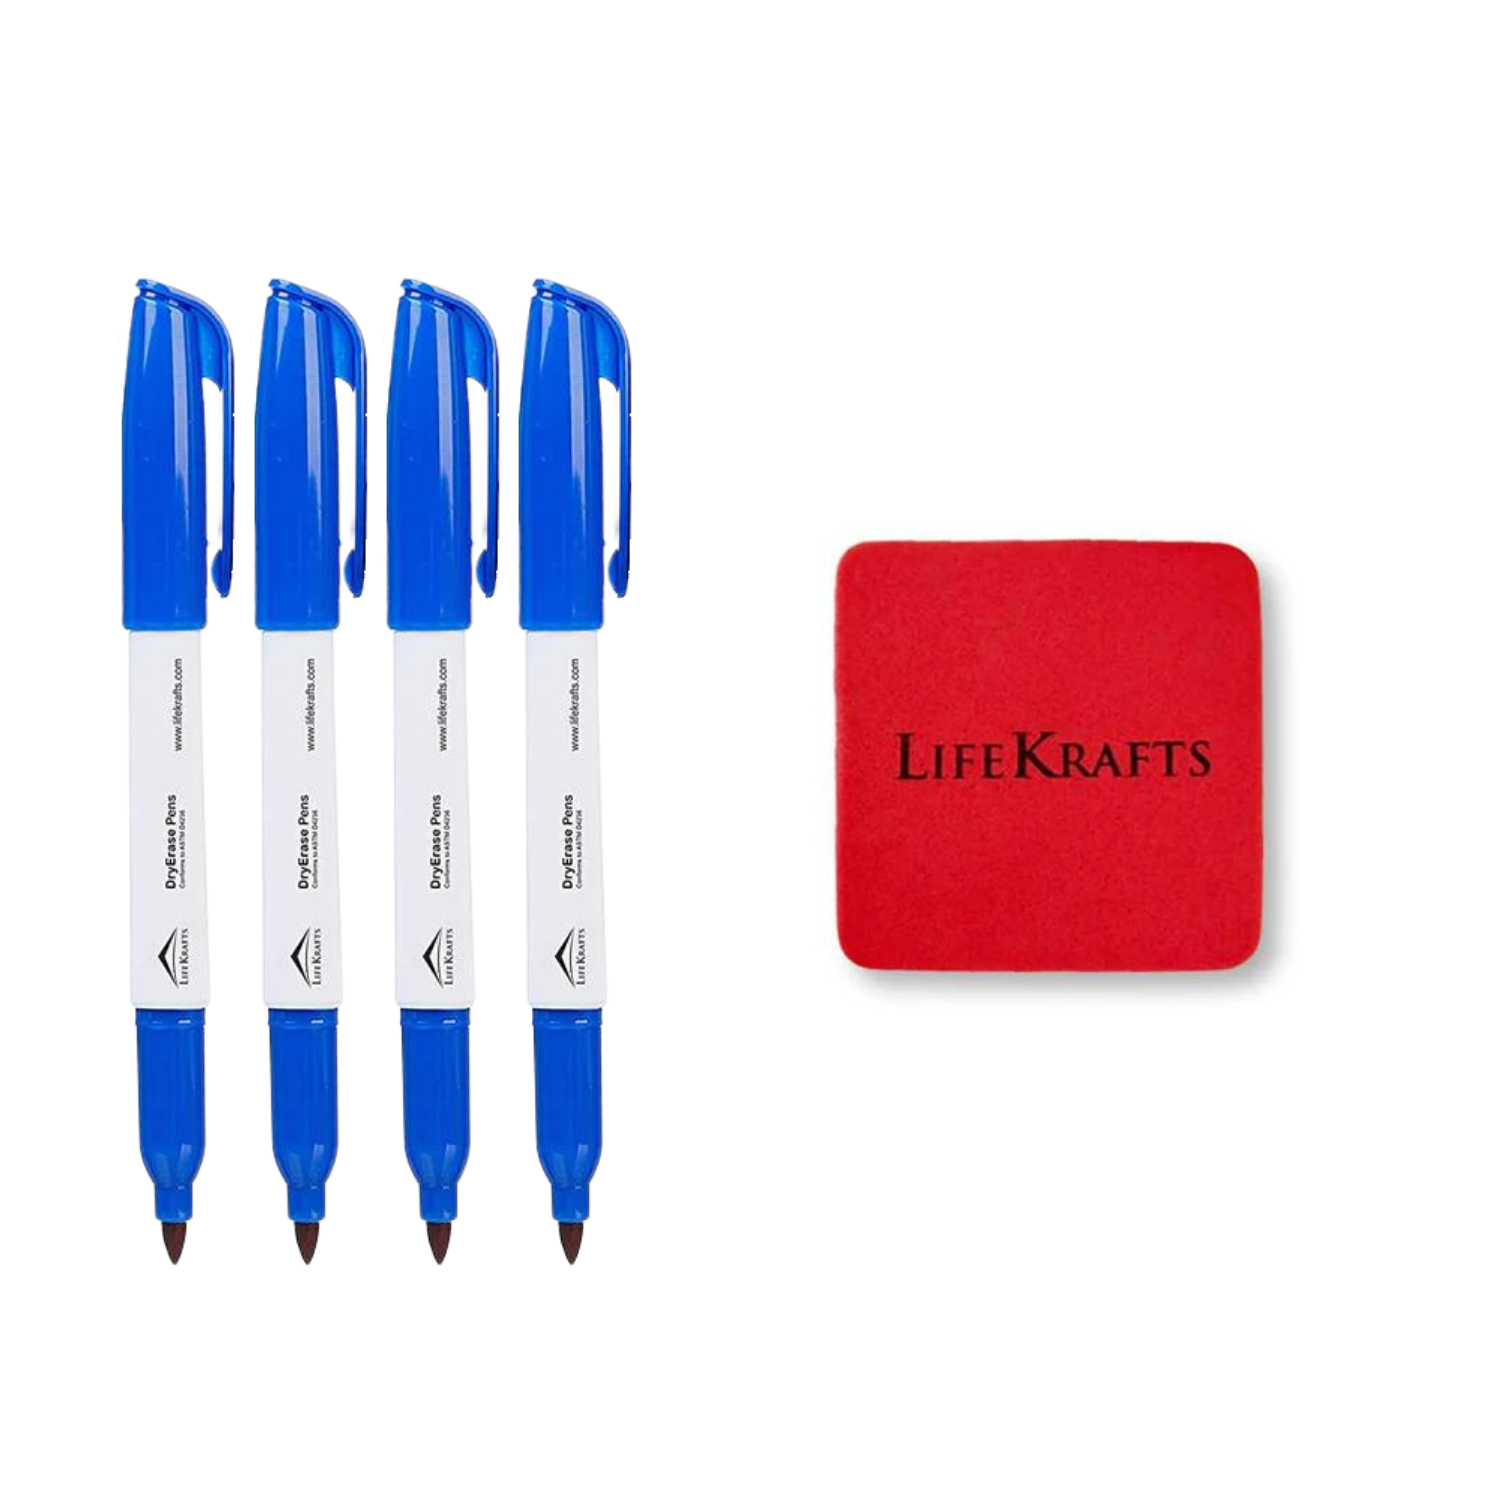 Dry Erase Marker Pens -includes Blue Perfect for writing on Whiteboards.